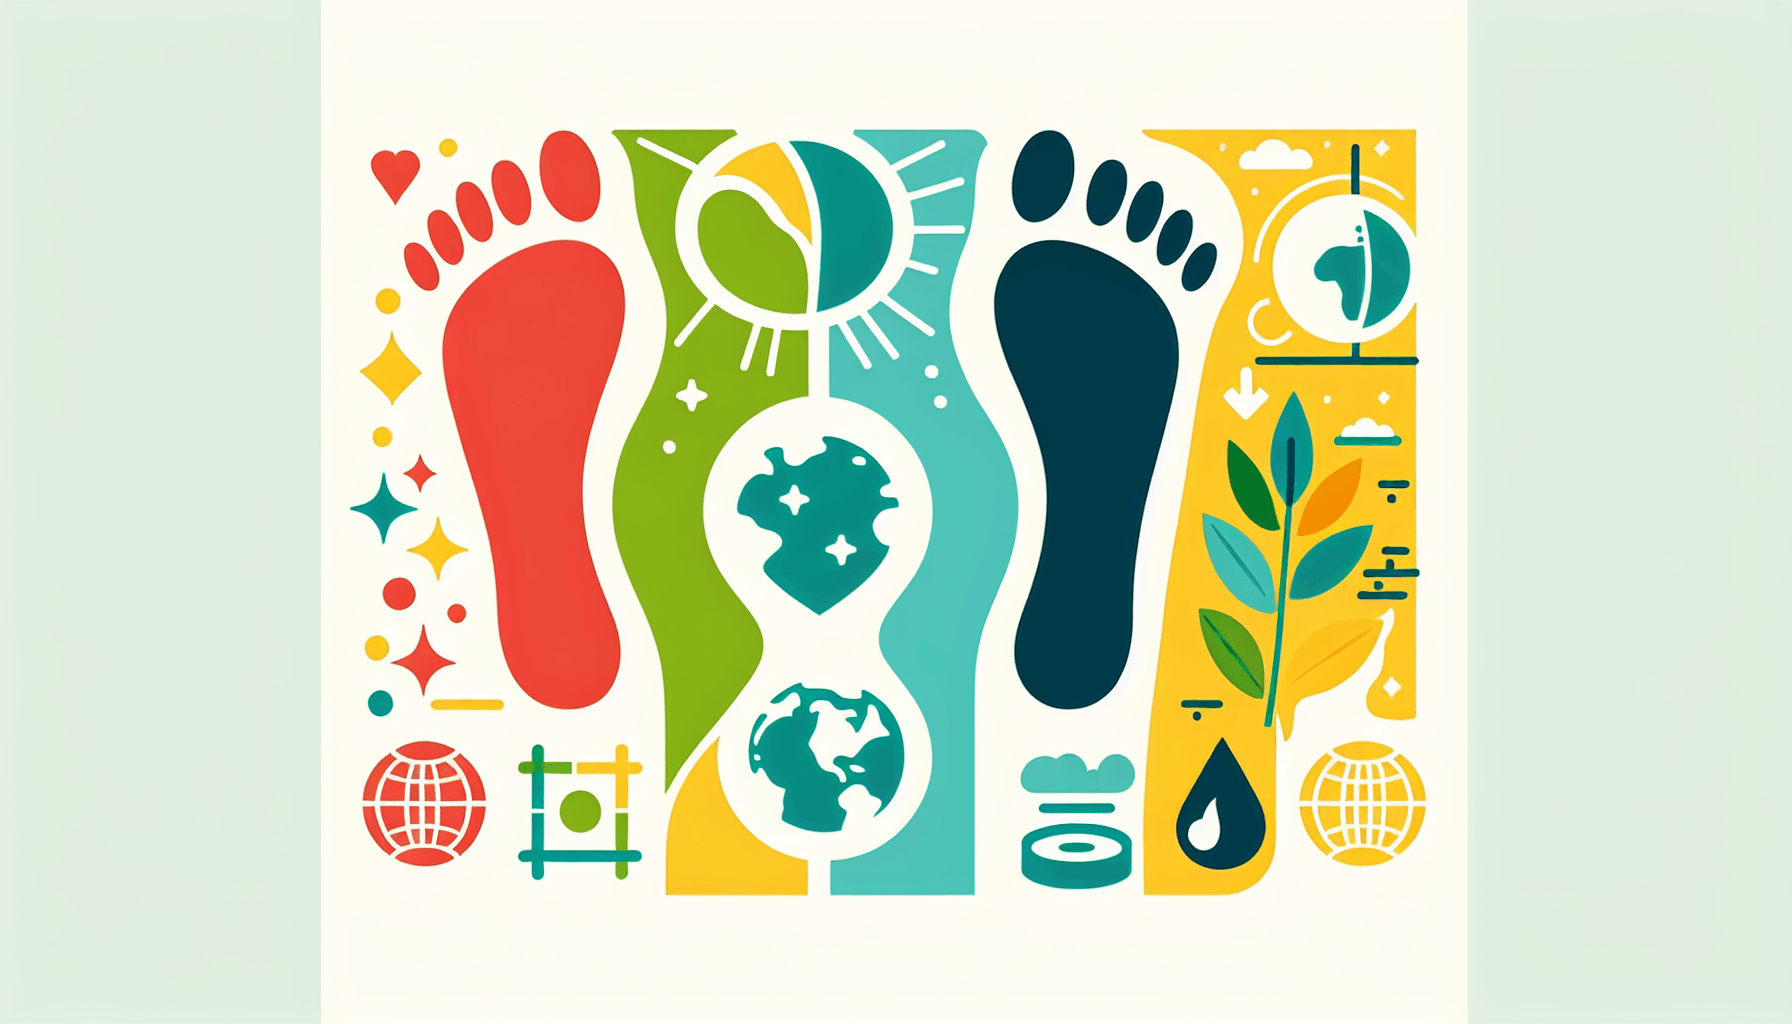 Ecological footprint in flat illustration style and white background, red #f47574, green #88c7a8, yellow #fcc44b, and blue #645bc8 colors.